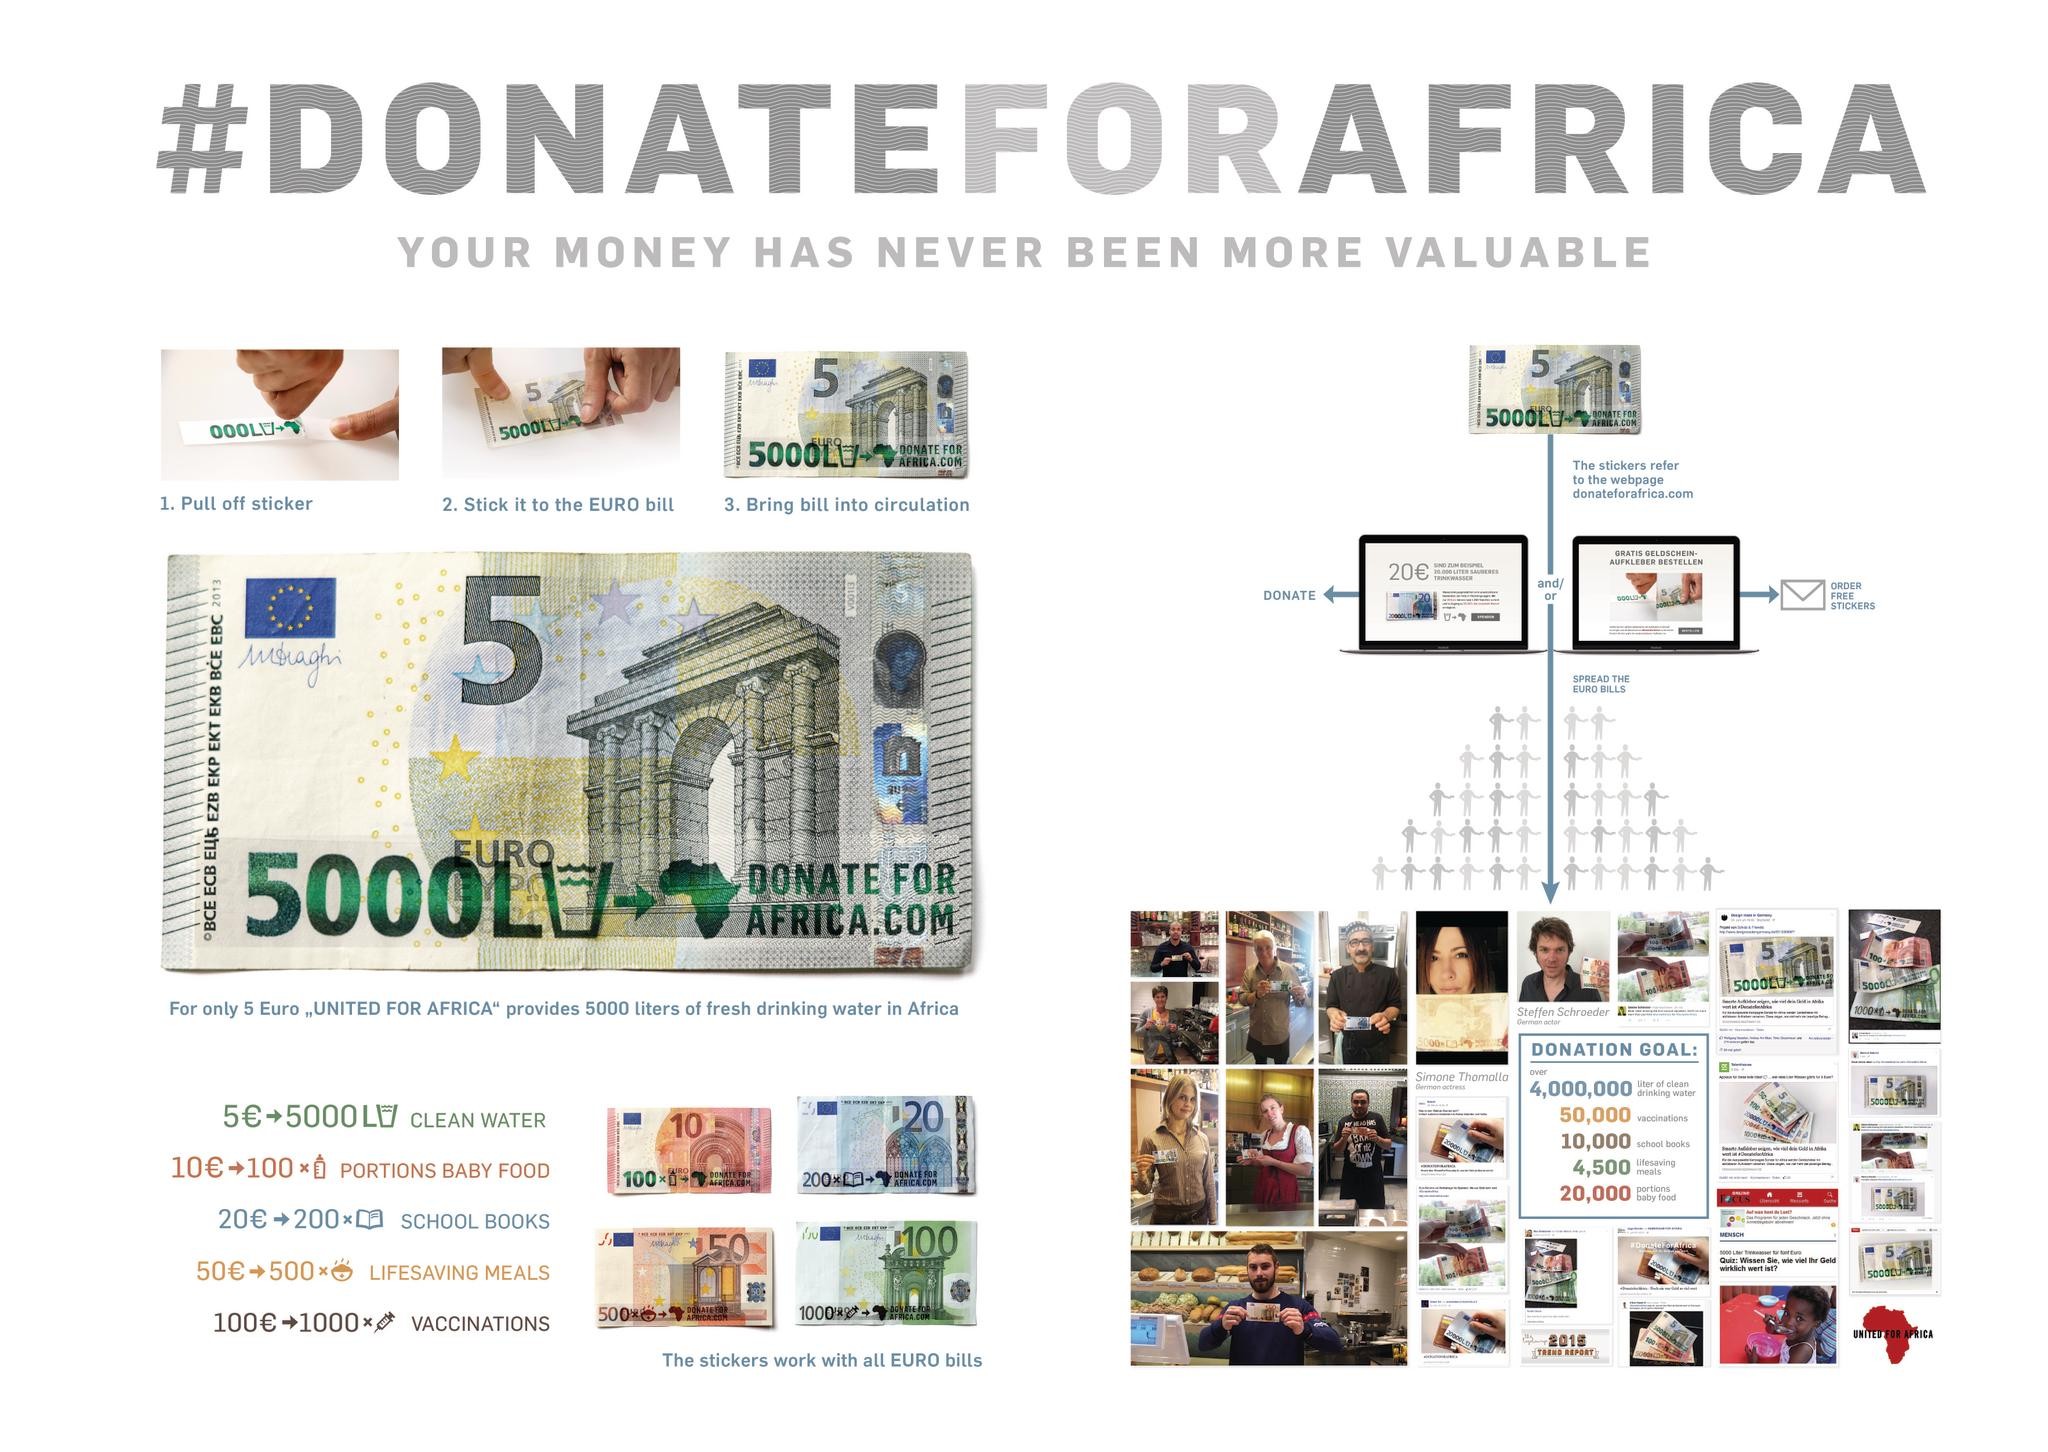 Donate for Africa. Your money has never been more valuable.